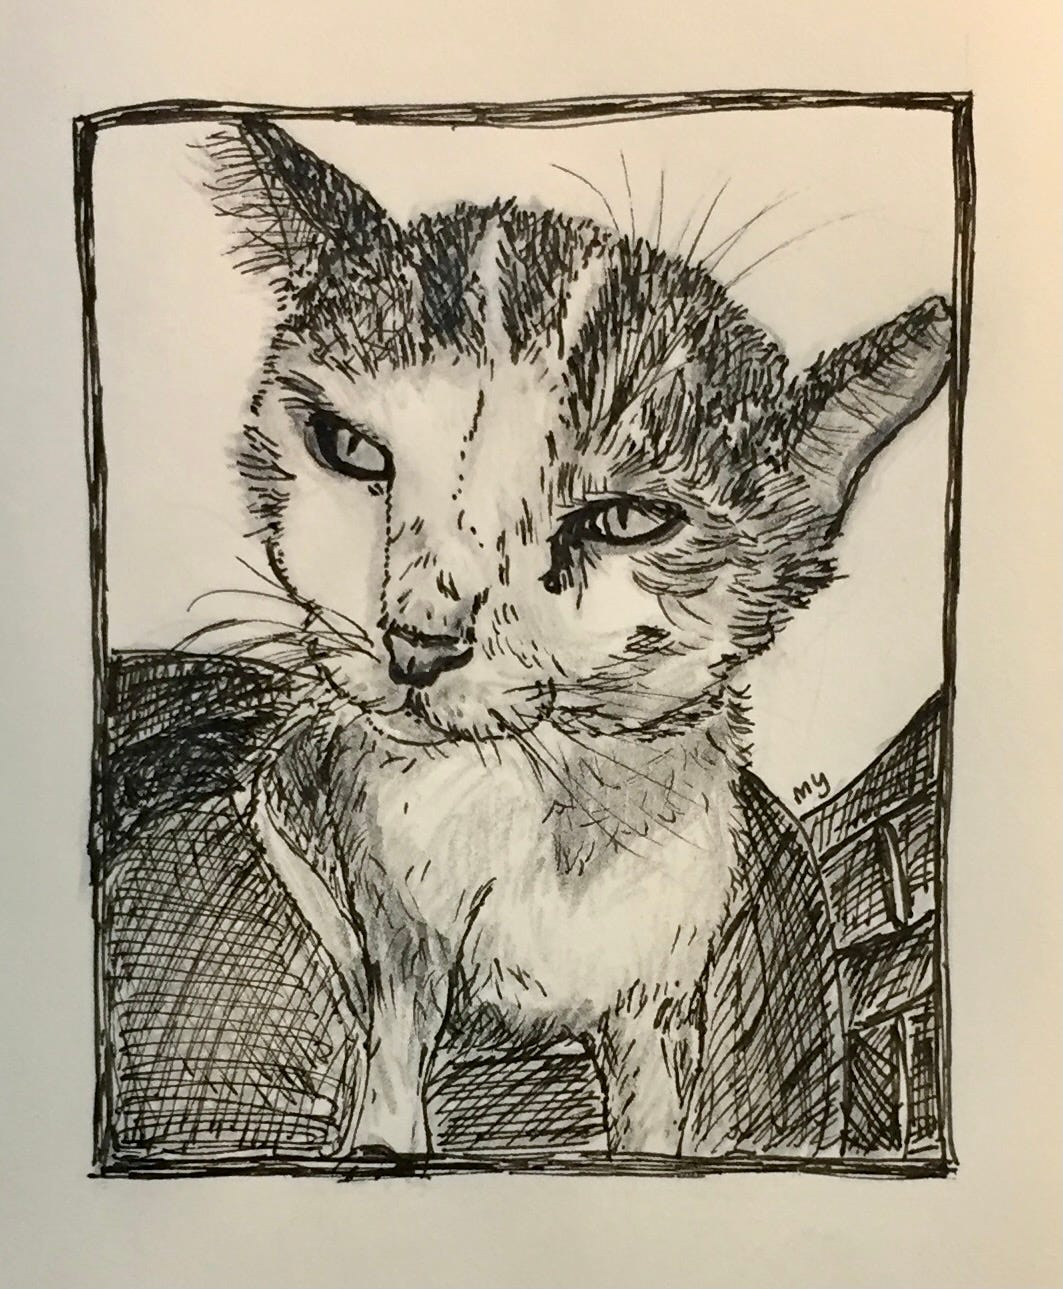 ink and pencil drawing of cat sitting on a chair